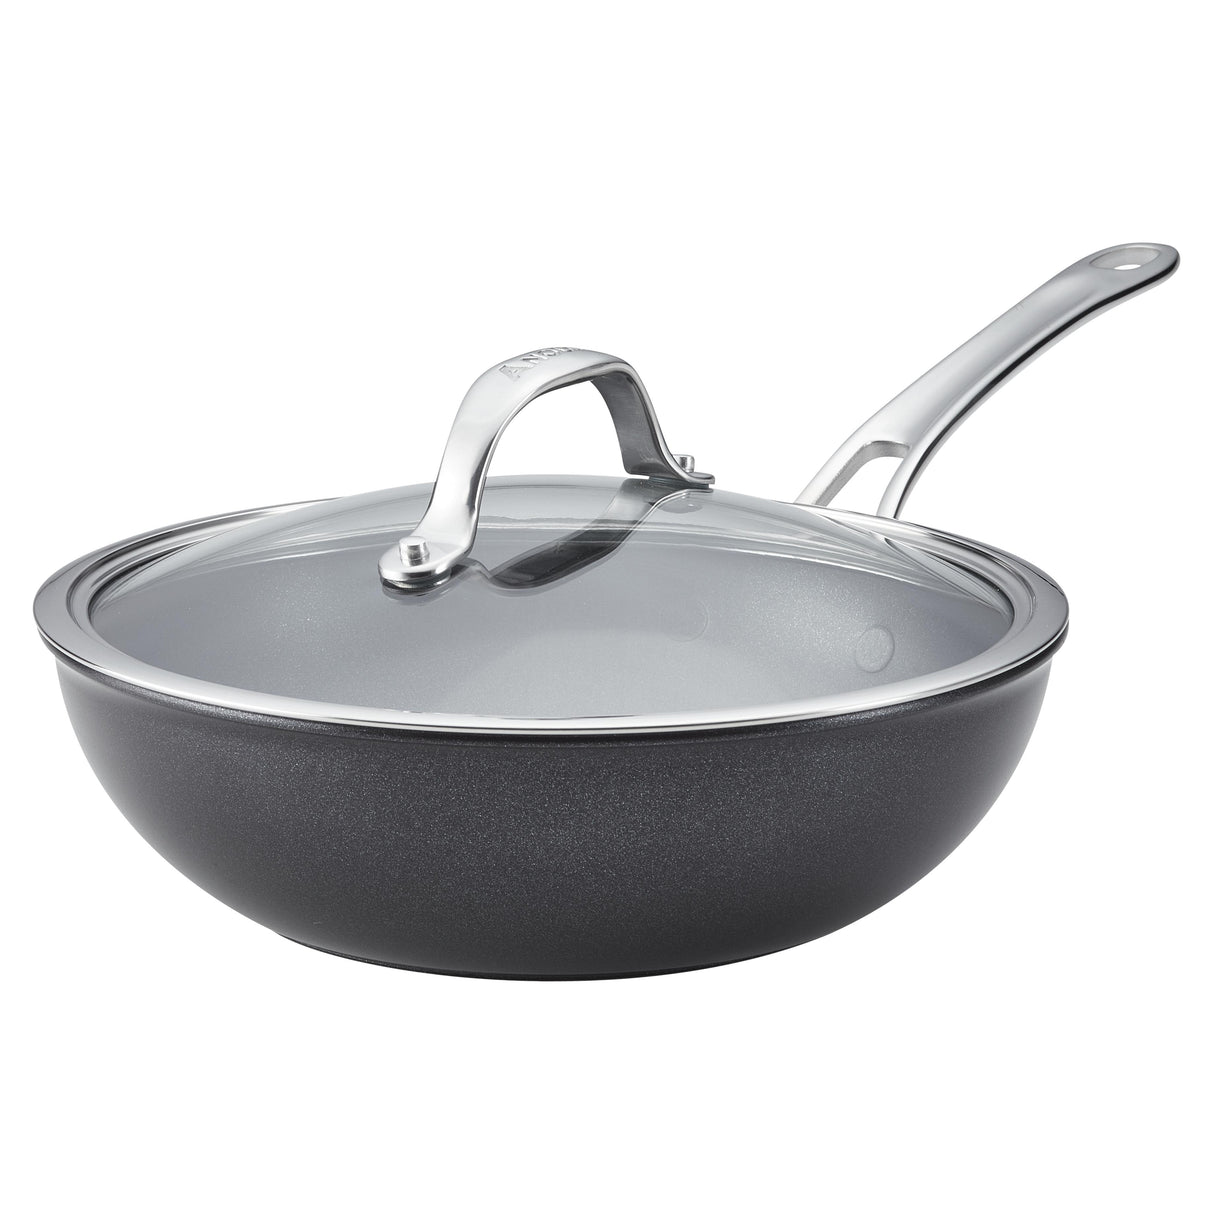 Anolon X flat-bottomed stir-fry wok with lid on a white background